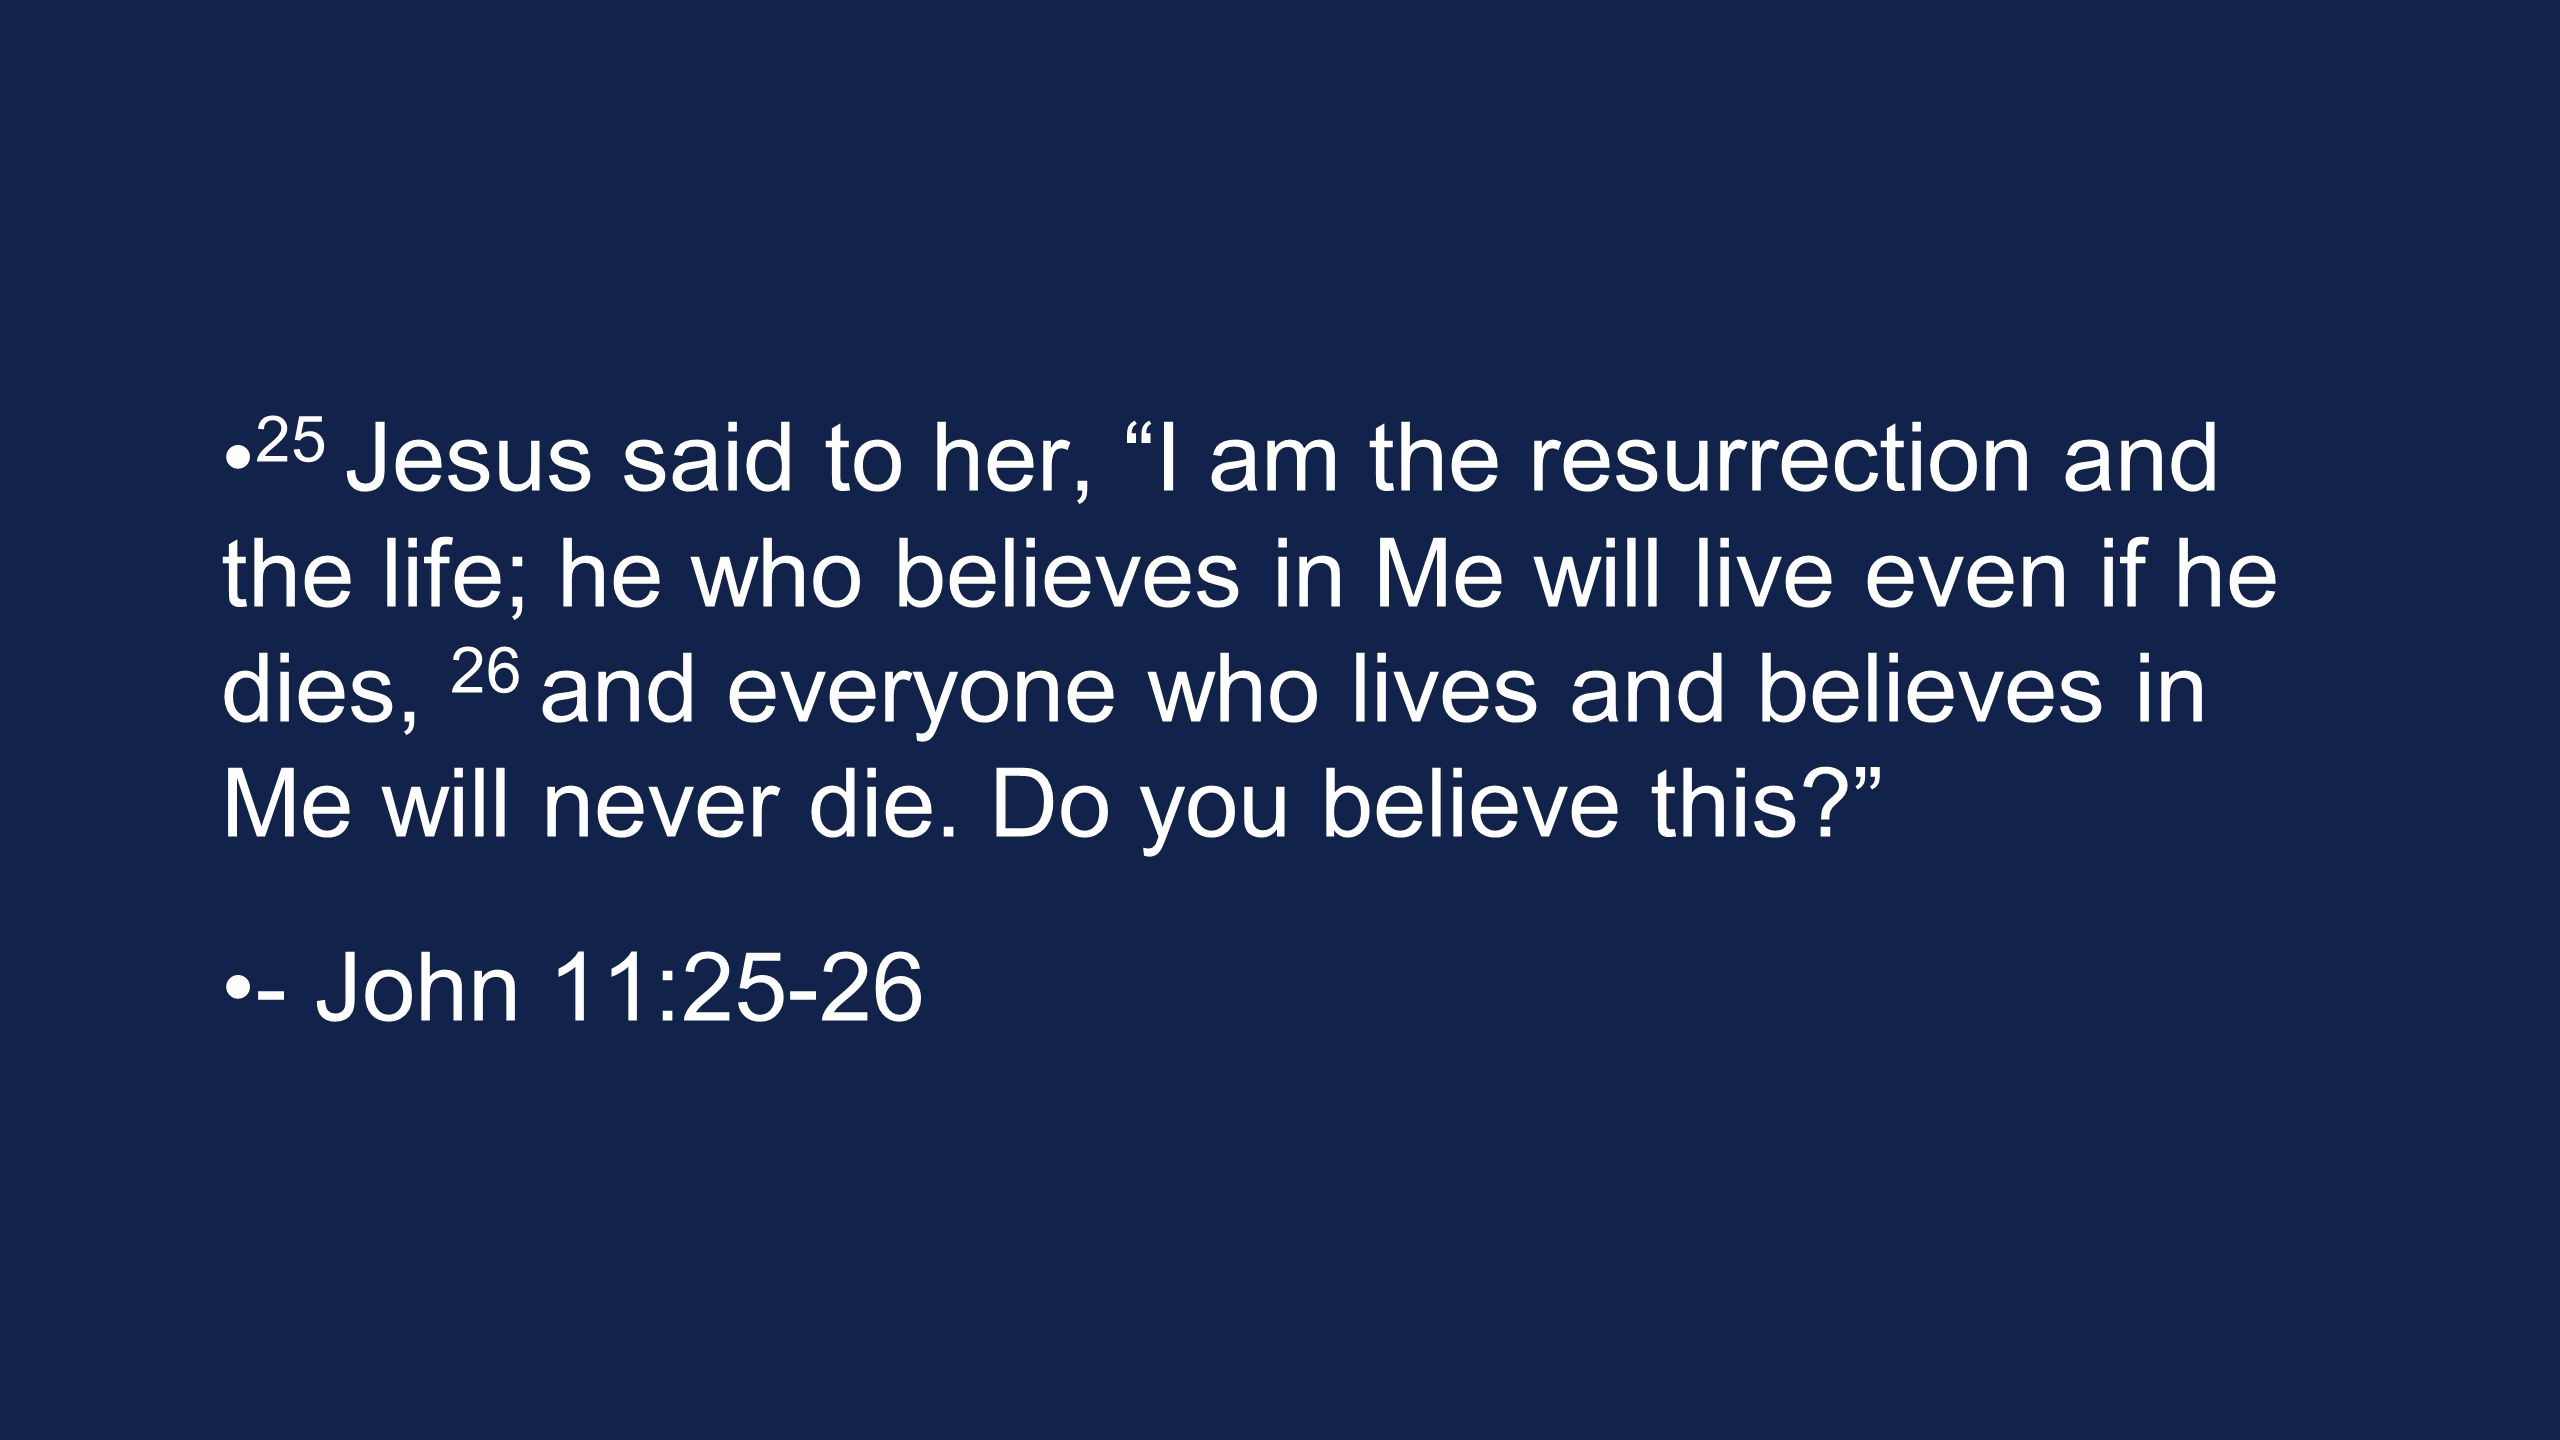 25 Jesus said to her, I am the resurrection and the life; he who believes in Me will live even if he dies, 26 and everyone who lives and believes in Me will never die.